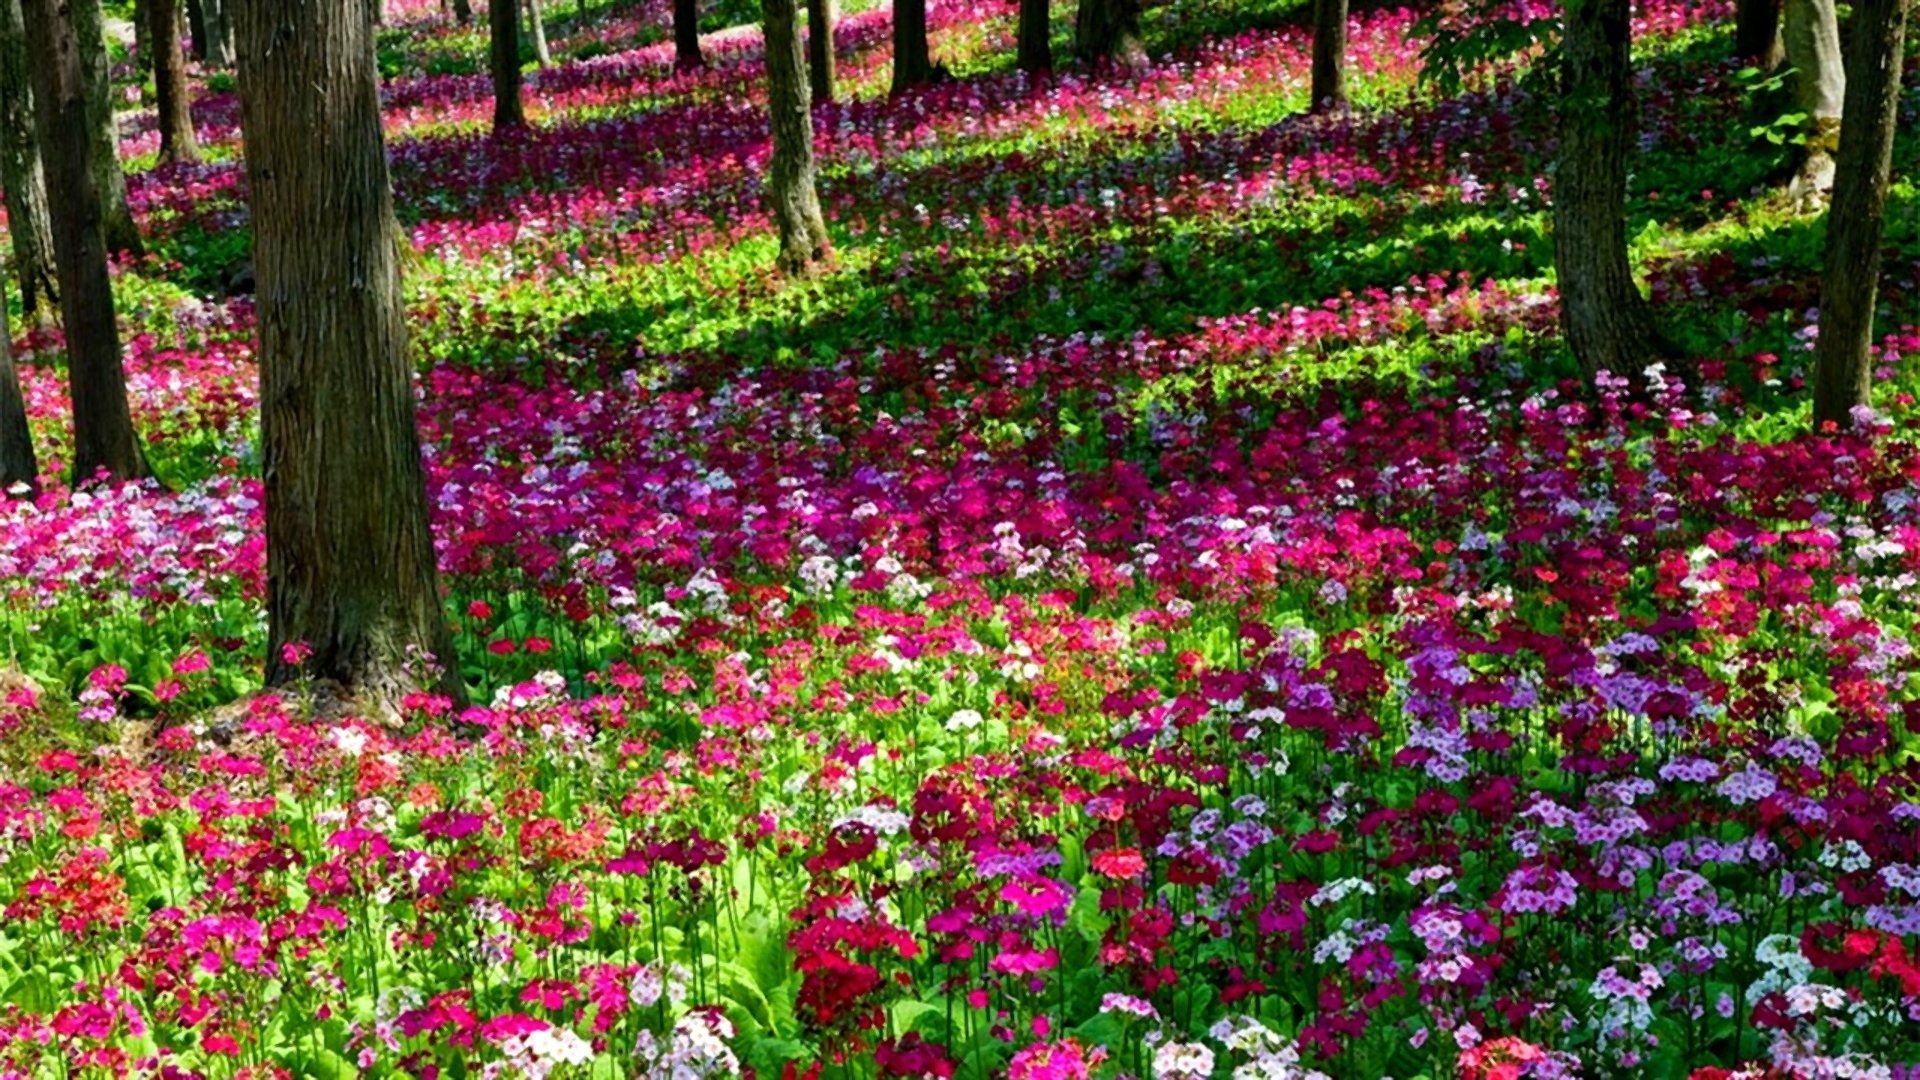 Spring Flowers in the Forest HD Wallpaper. Background Image